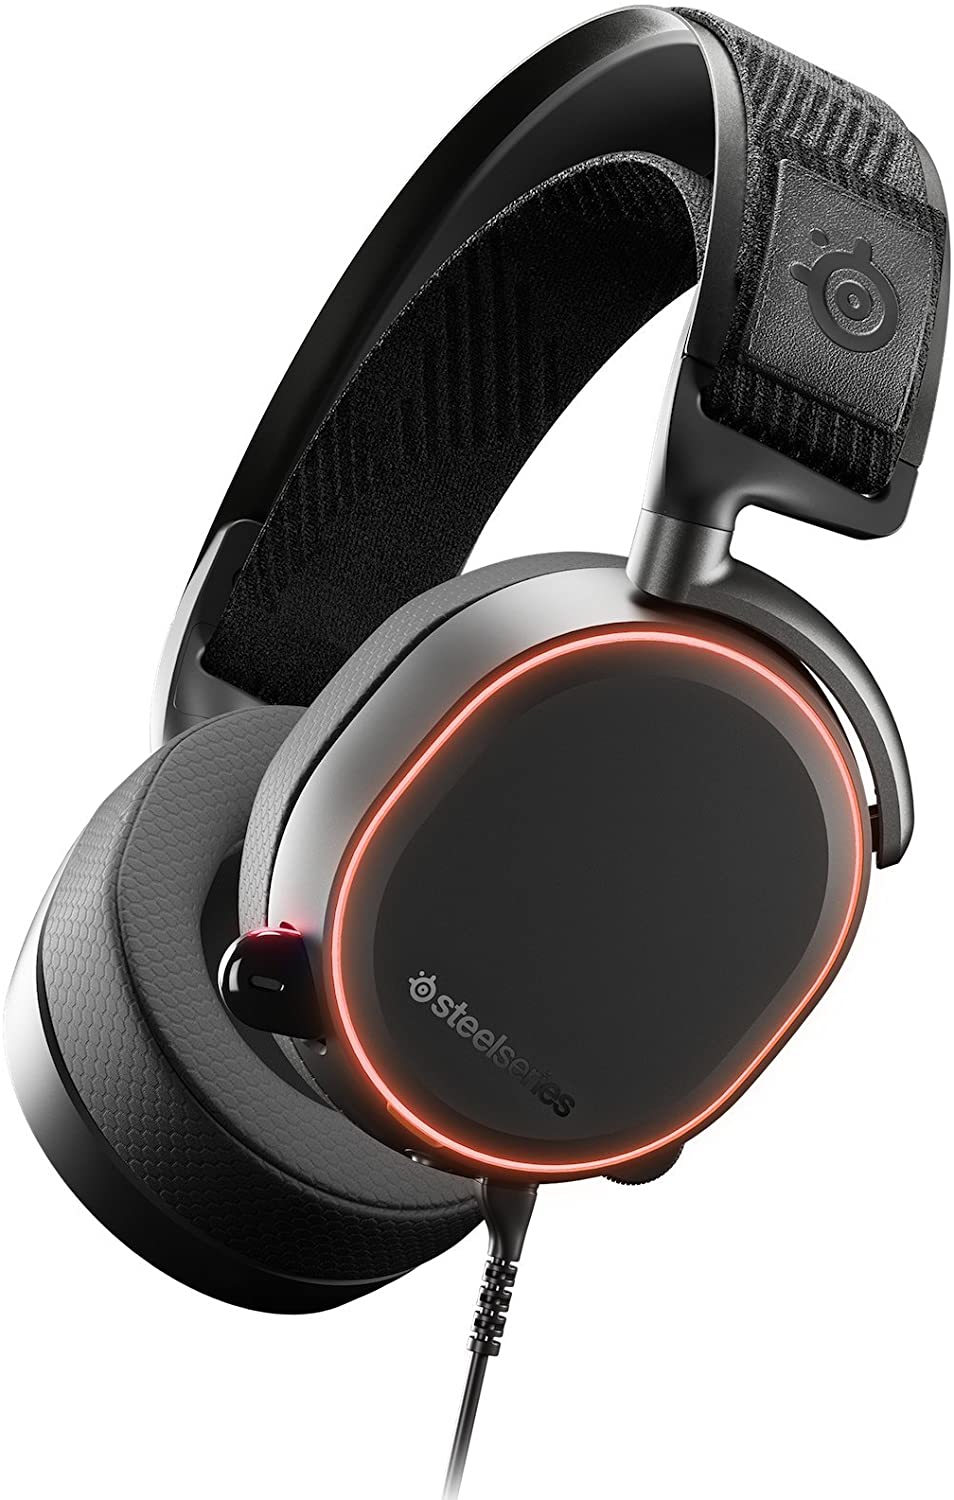 SteelSeries Arctis PRO ChatMix Dial, Gaming Headset